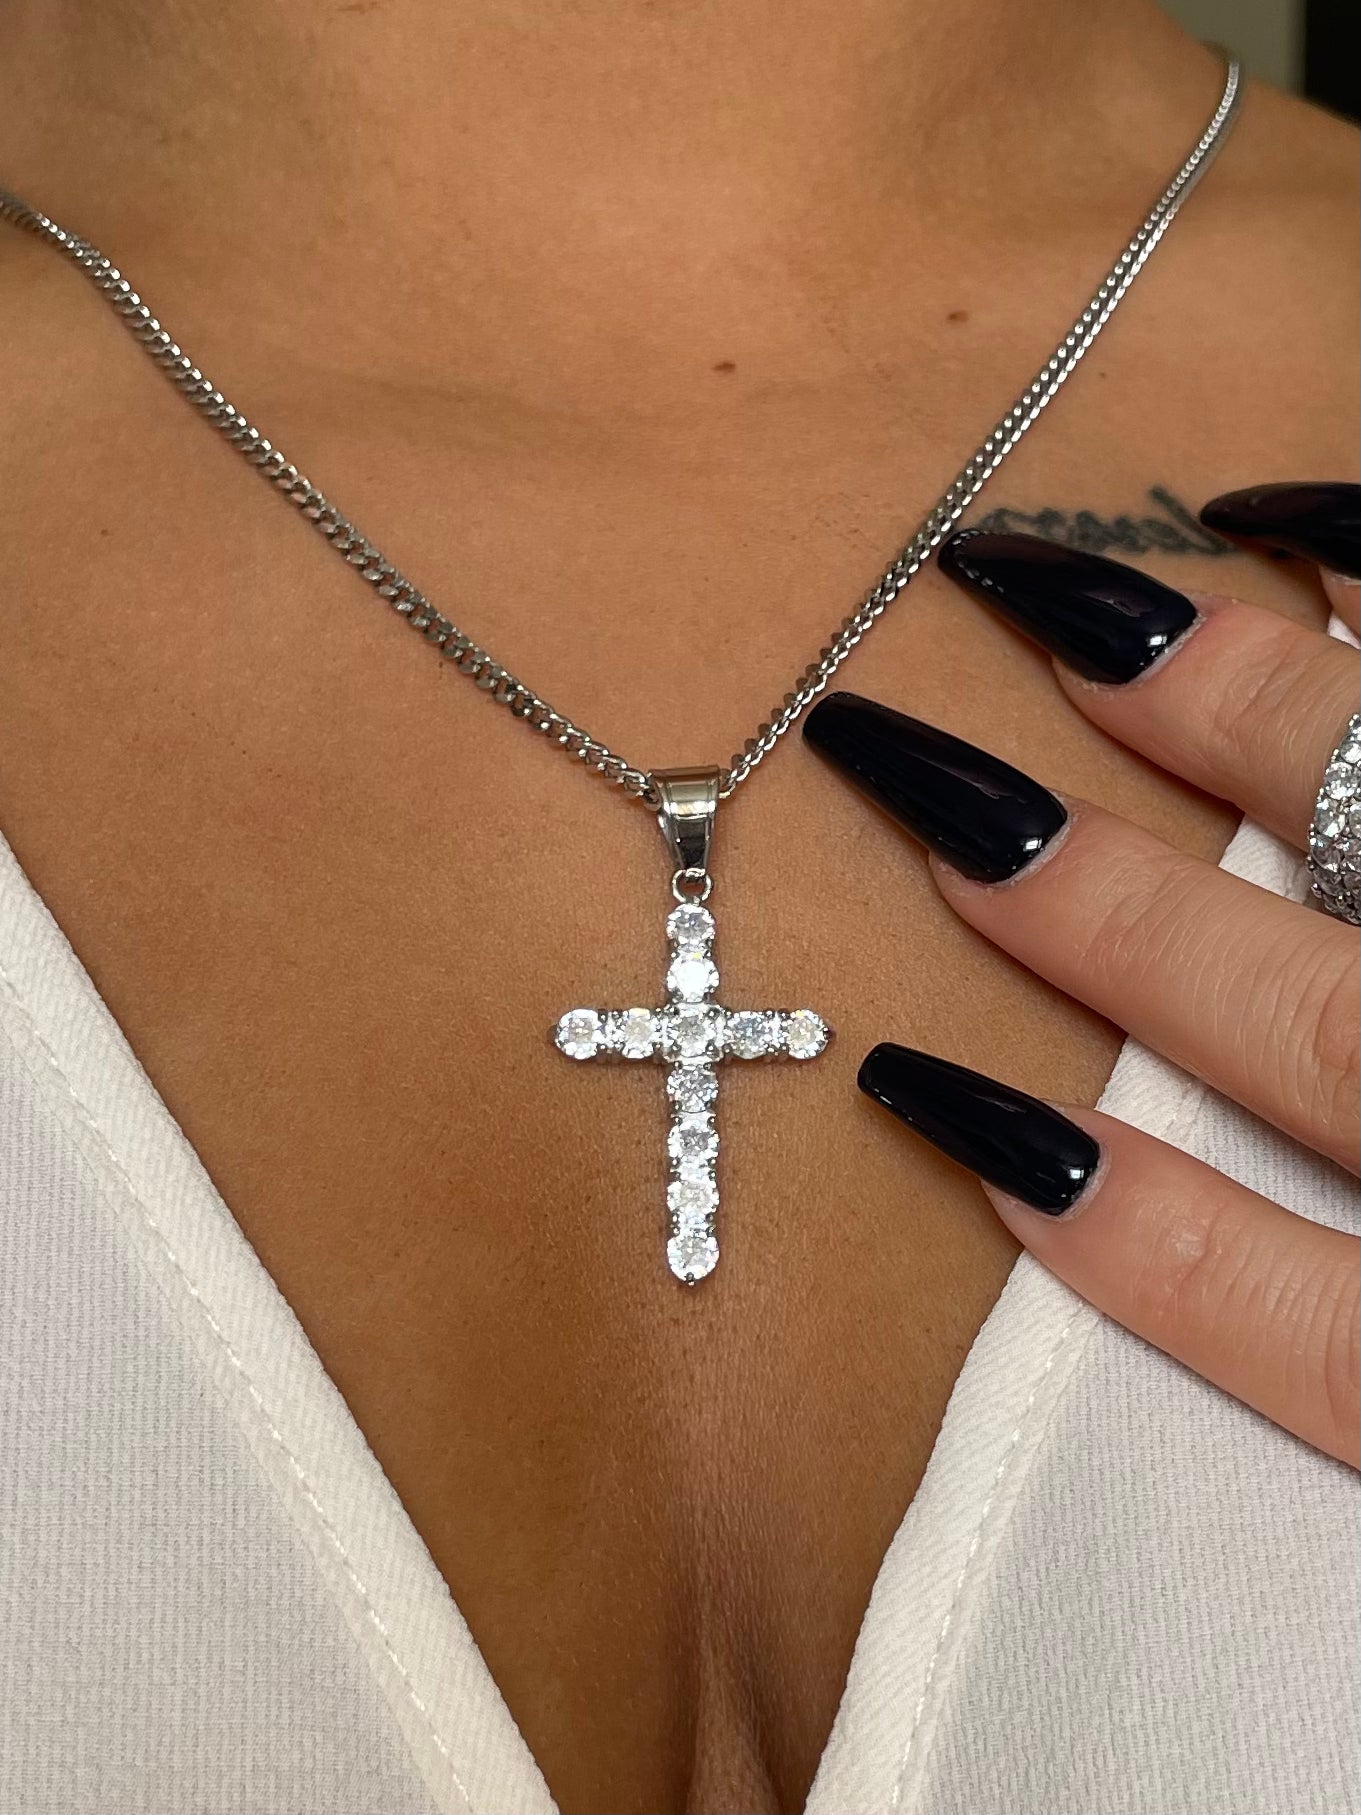 CROSS NECKLACE - WHITE GOLD